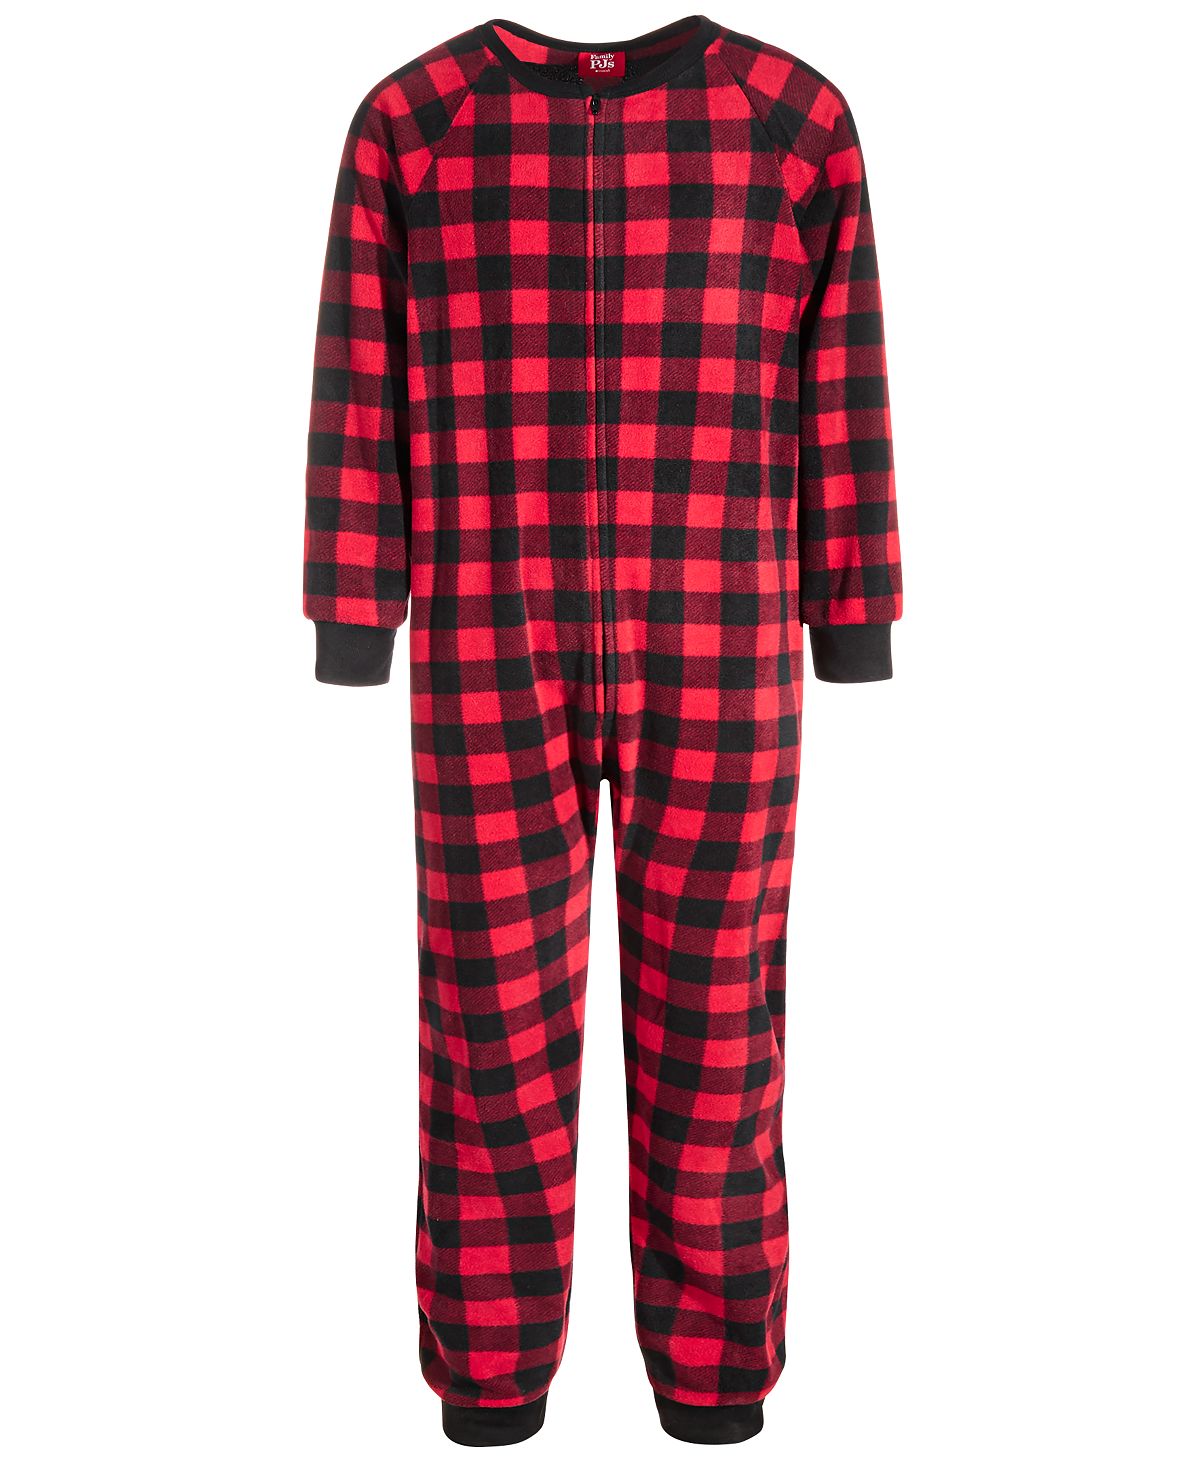 Family Pajamas Matching Toddler Little & Big Kids 1-pc. Red Check Printed Red Check